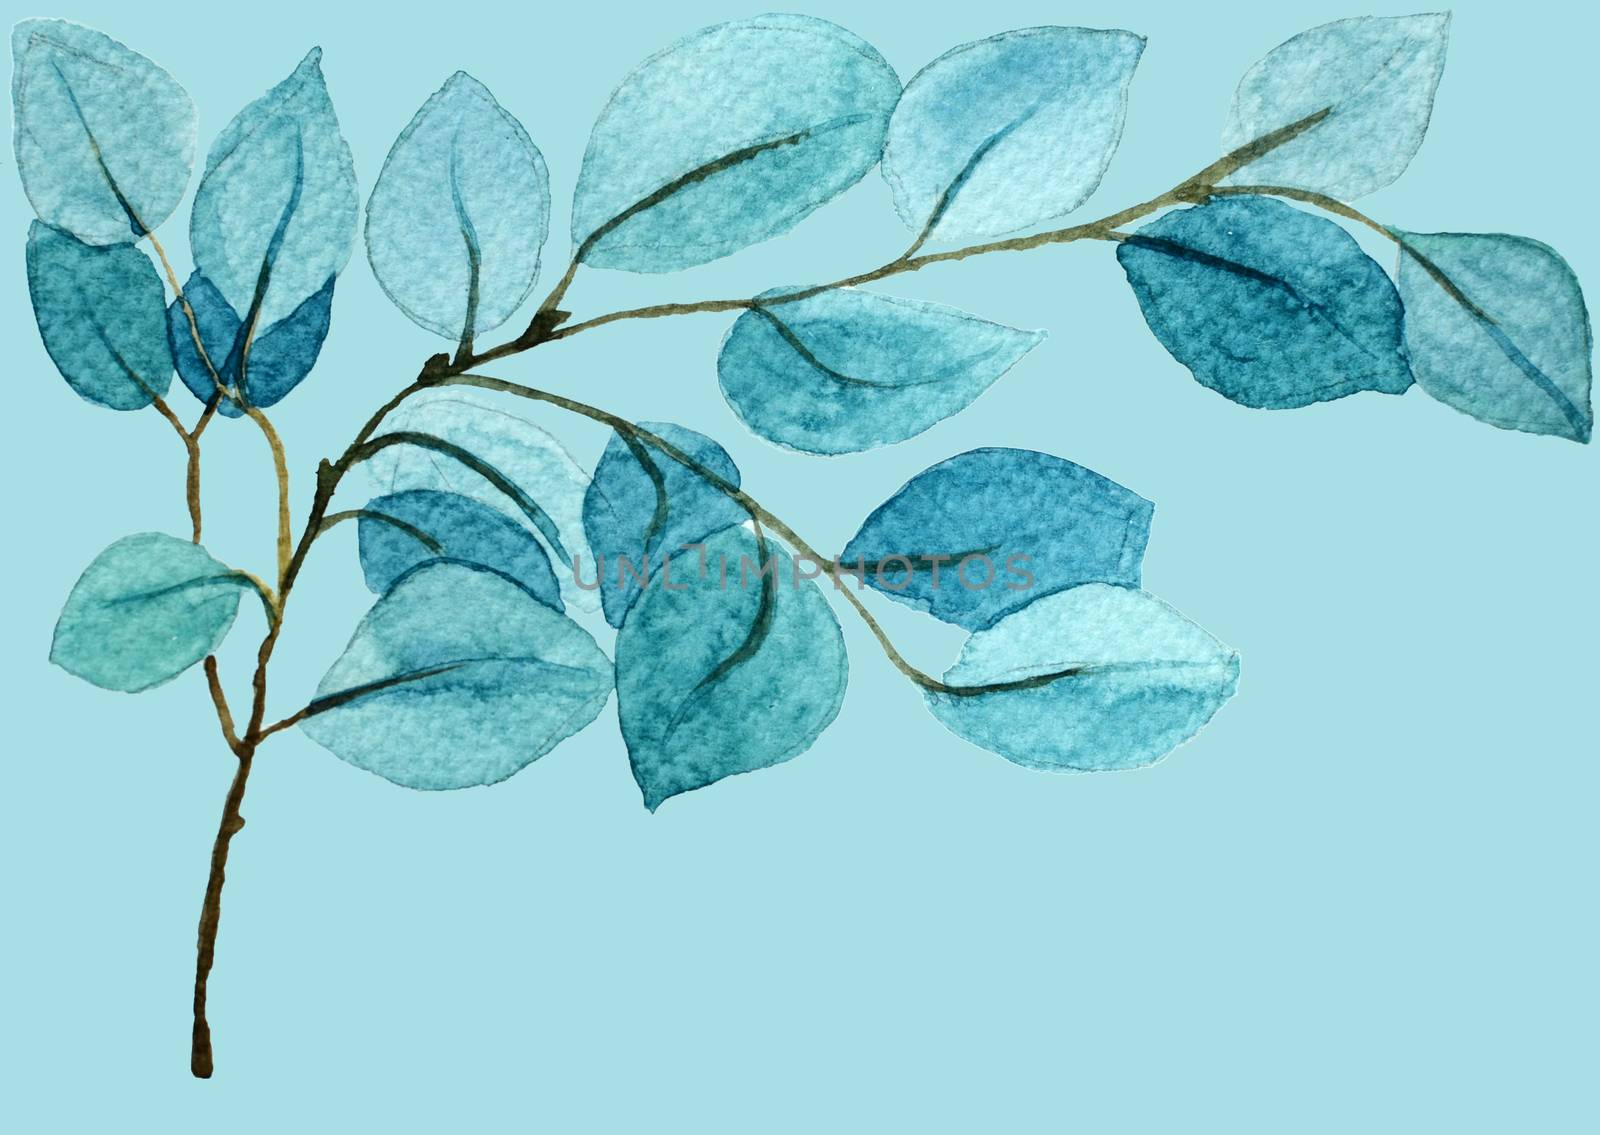 Blue retro exotic branch with leaves. Ornate delicate watercolor flowers for wedding invitations, greeting cards, blogs, posters and more